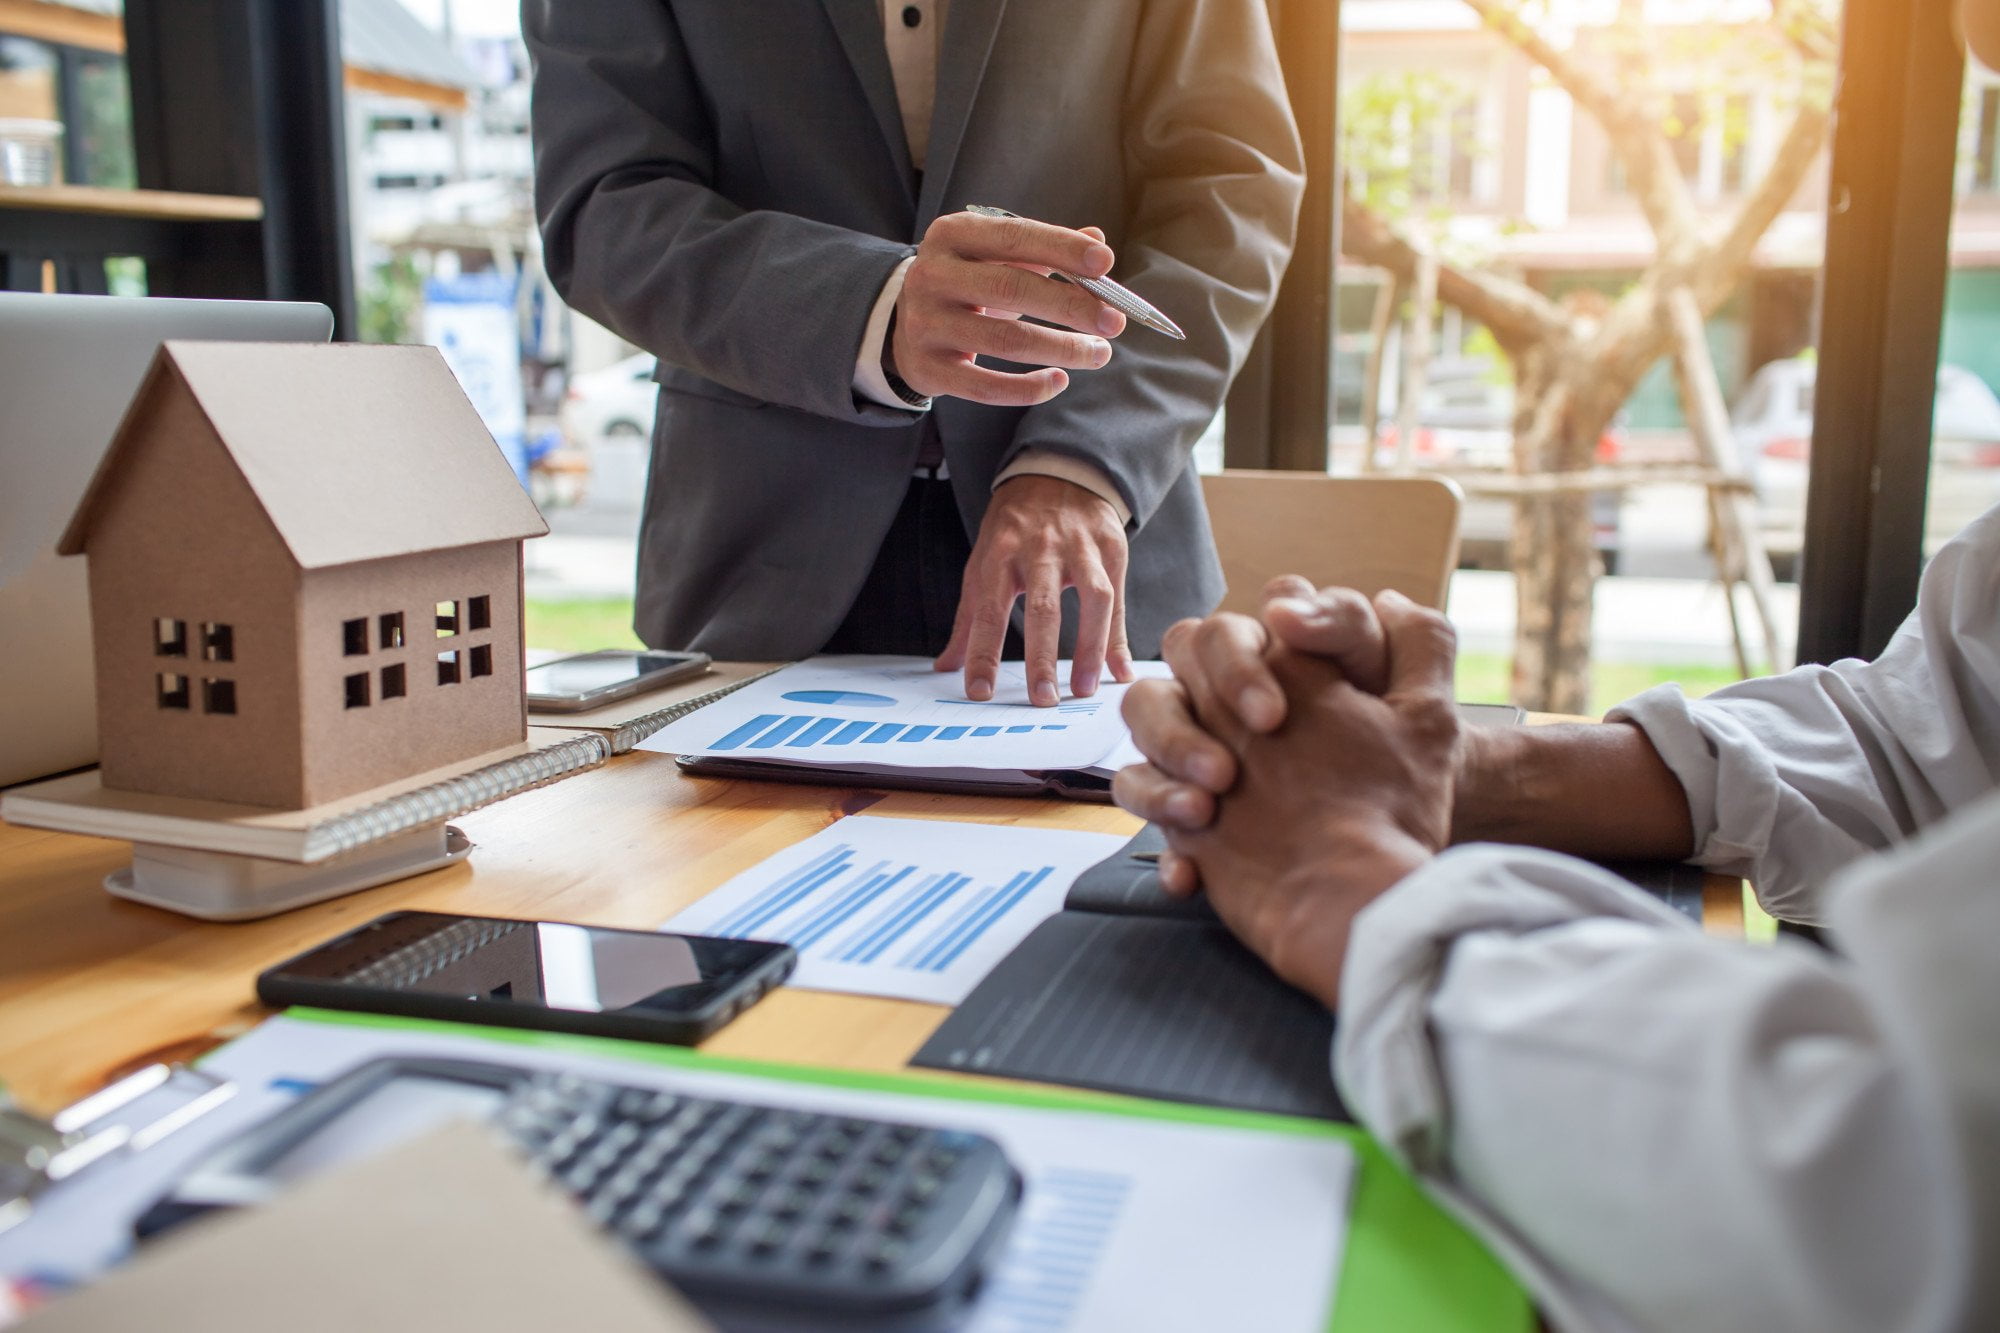 Real estate is an exciting career to get into, especially on the sales side. This guide compares the roles between a real estate salesperson vs broker.